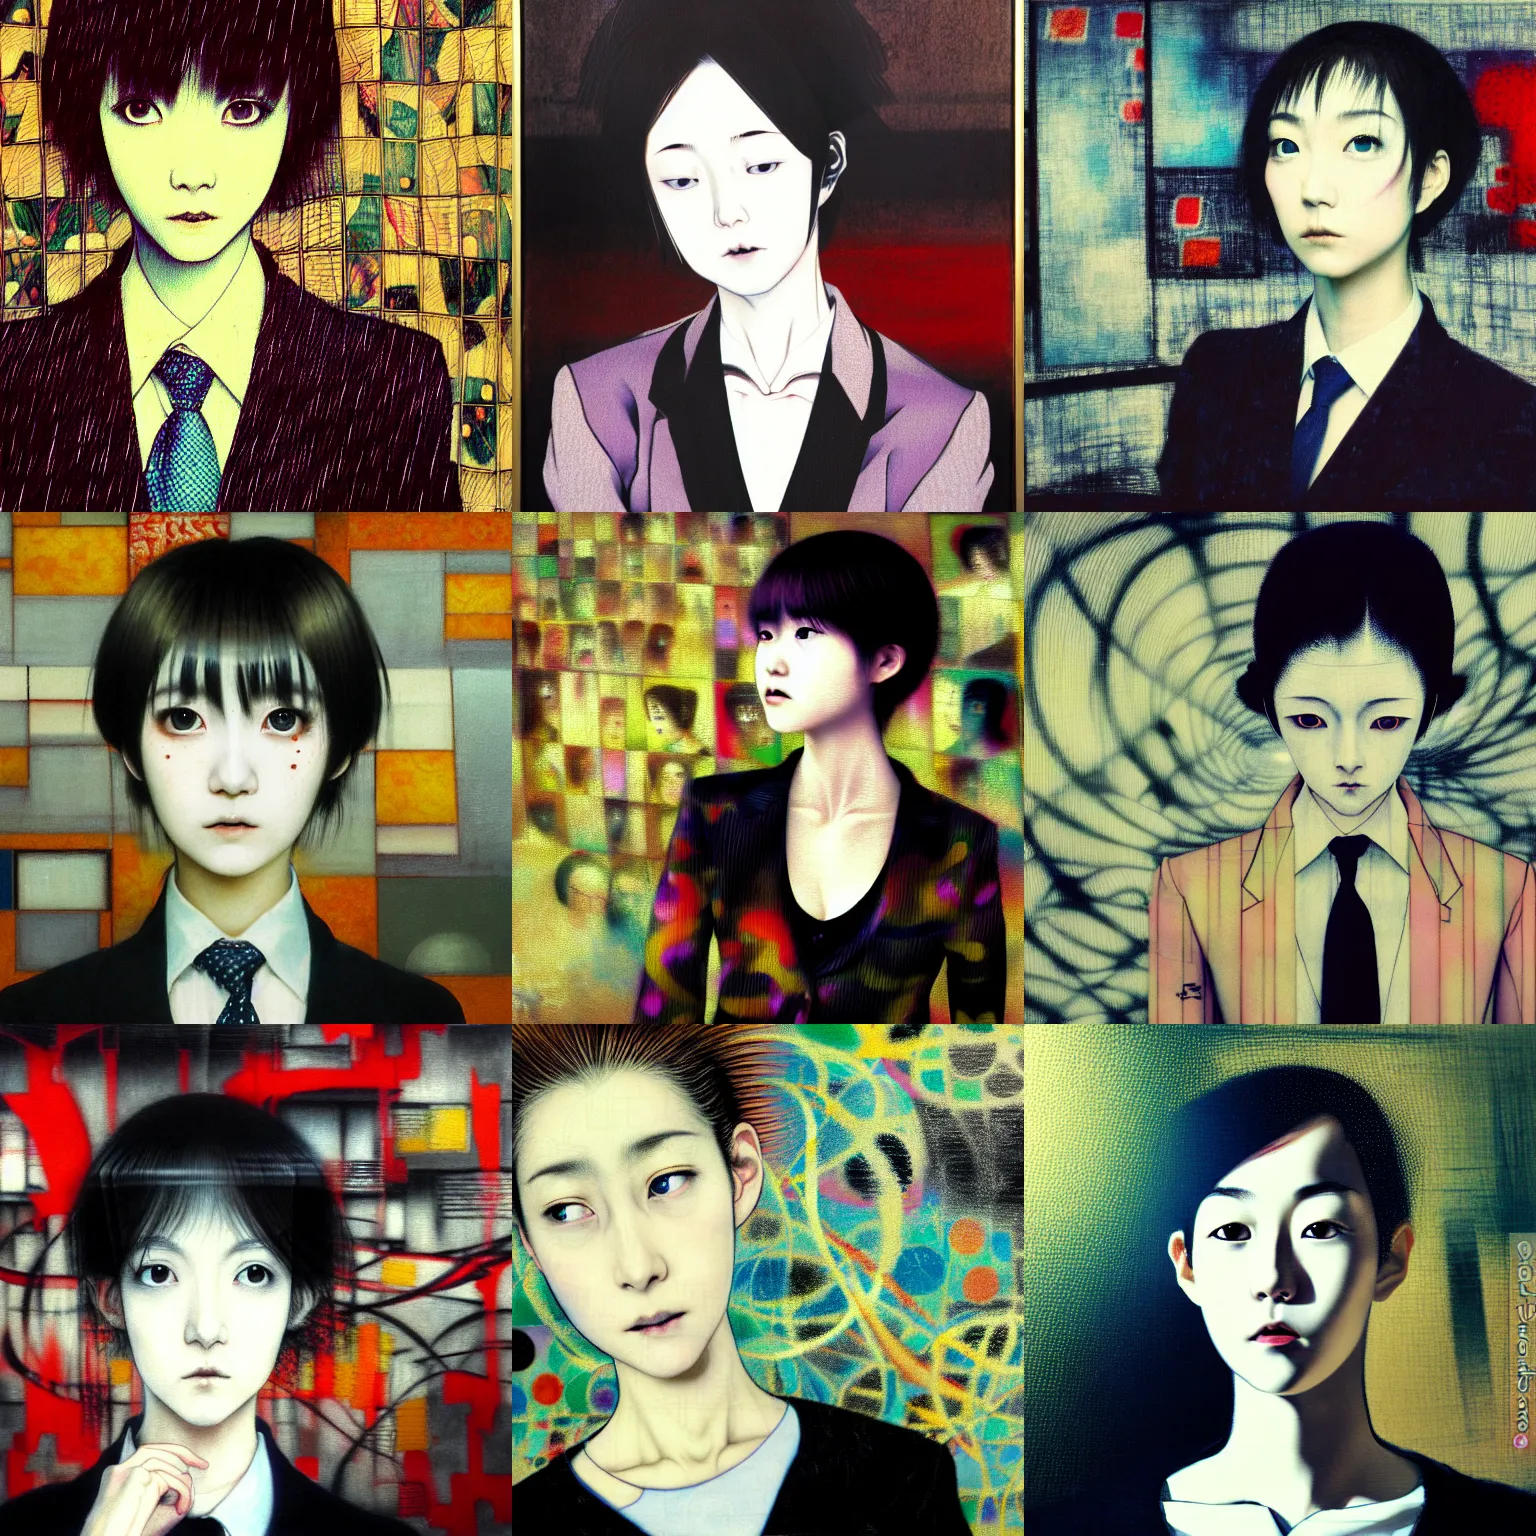 Prompt: yoshitaka amano blurred and dreamy realistic three quarter angle portrait of a young woman with short hair and black eyes wearing office suit with tie, junji ito abstract patterns in the background, satoshi kon anime, noisy film grain effect, highly detailed, renaissance oil painting, weird portrait angle, blurred lost edges, 3 / 4 view portrait